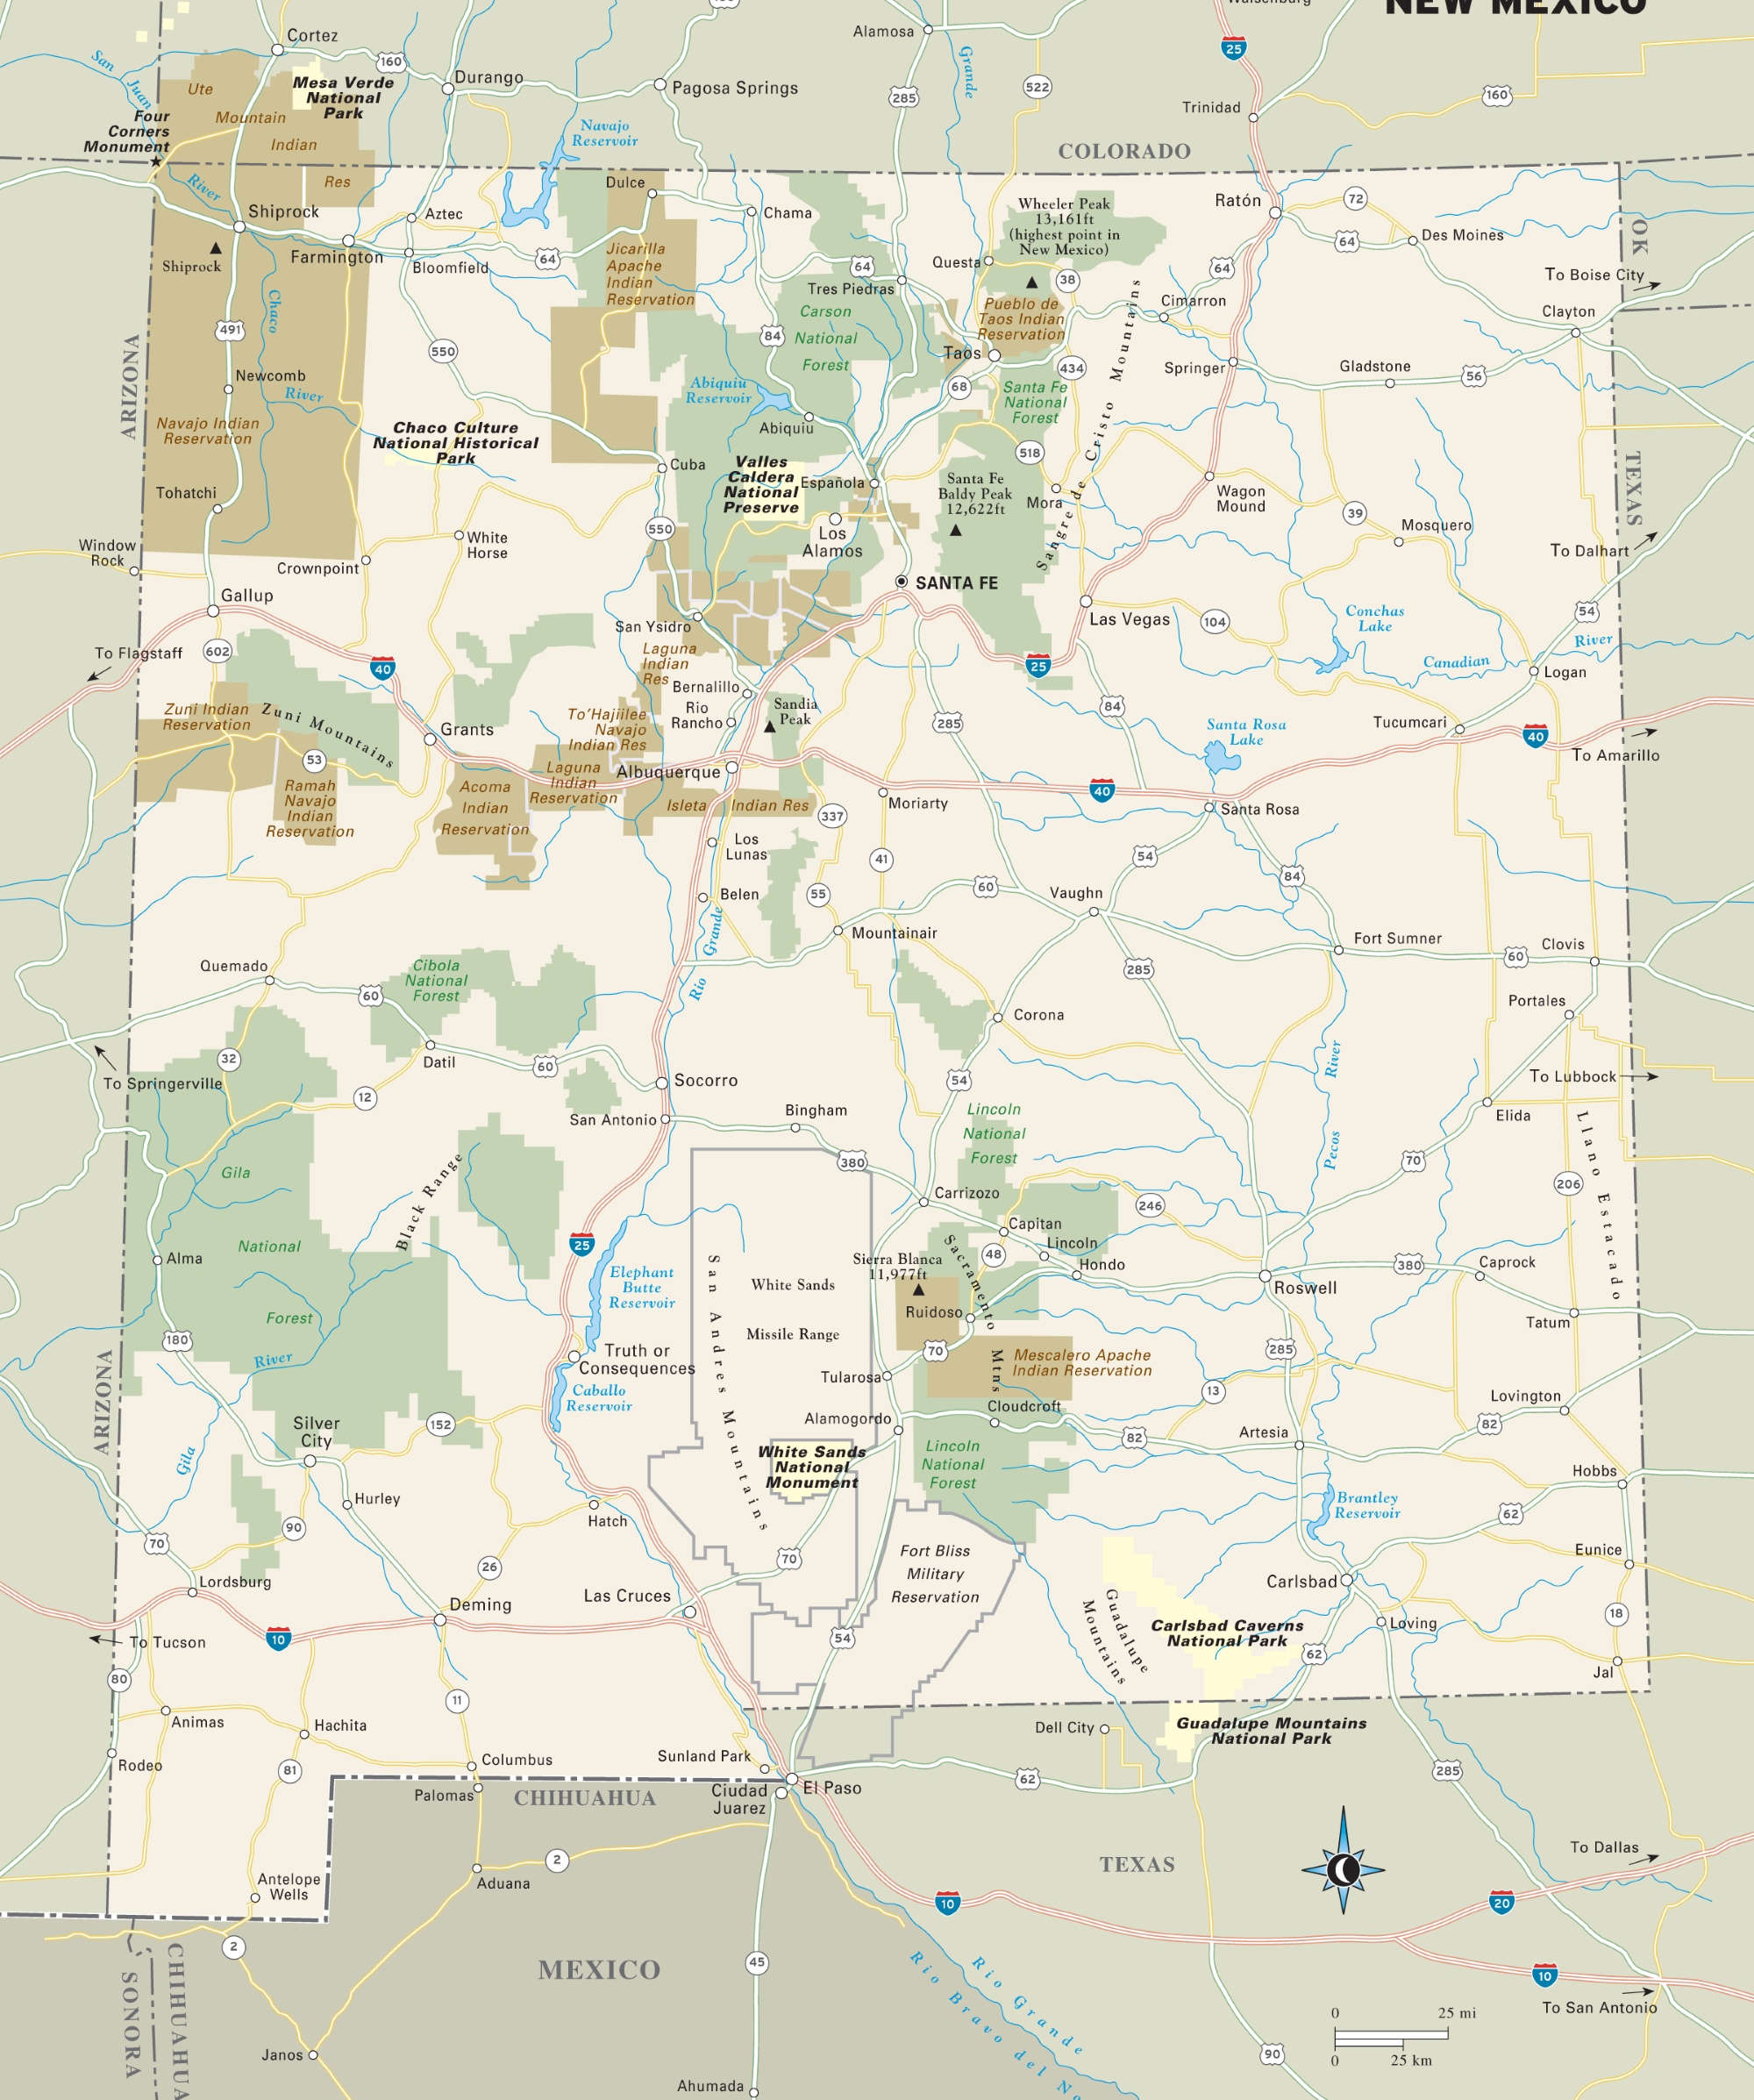 New Mexico National Parks Monuments And Forests Map